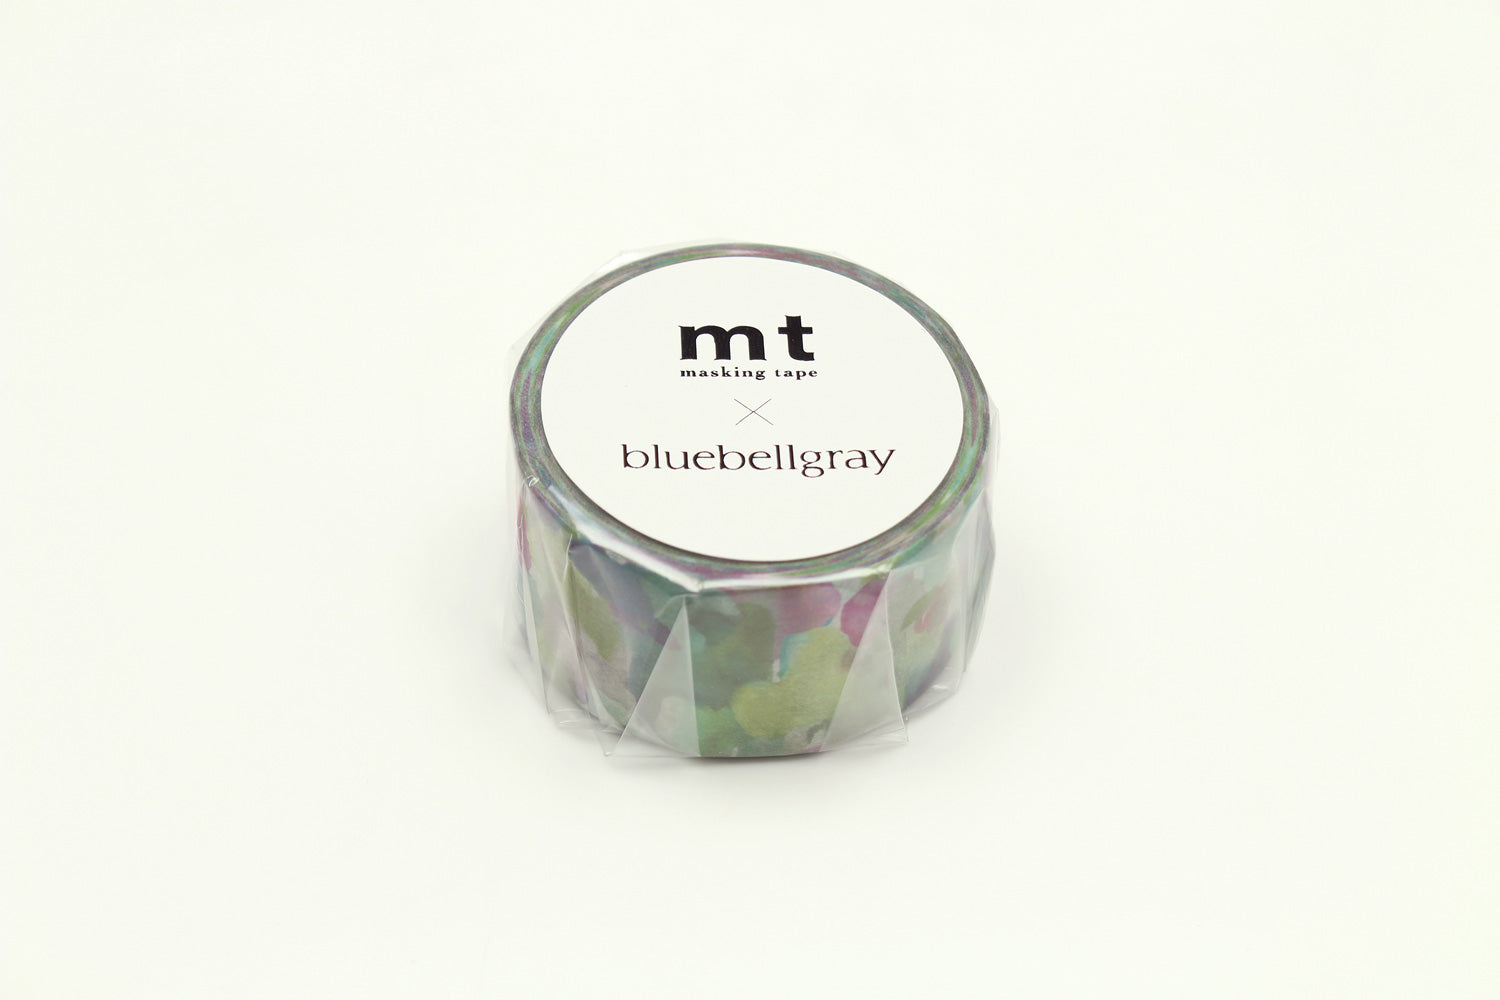 mt x Bluebellgray - Rothesay - 24mm Washi Tape